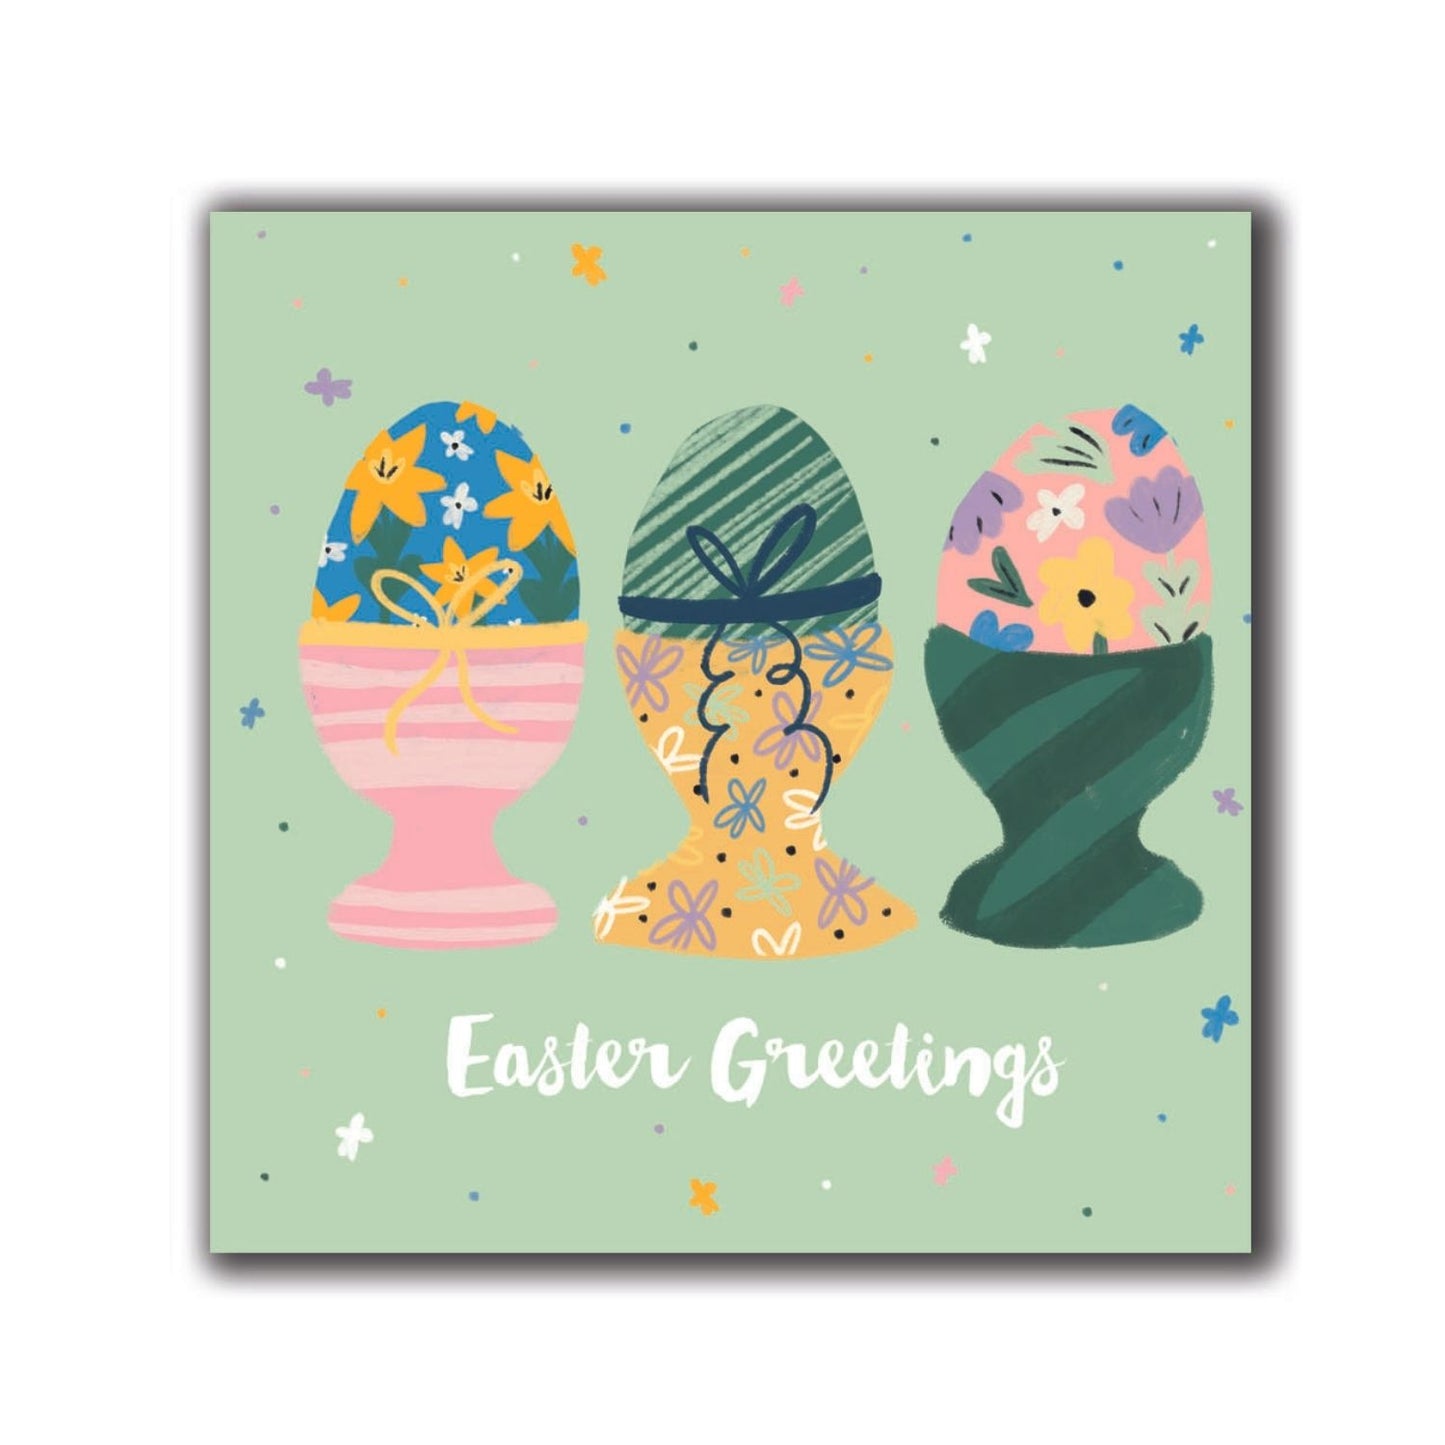 Pack Of 6 Samaritans Happy Easter Egg Easter Cards Charity Easter Greeting Cards